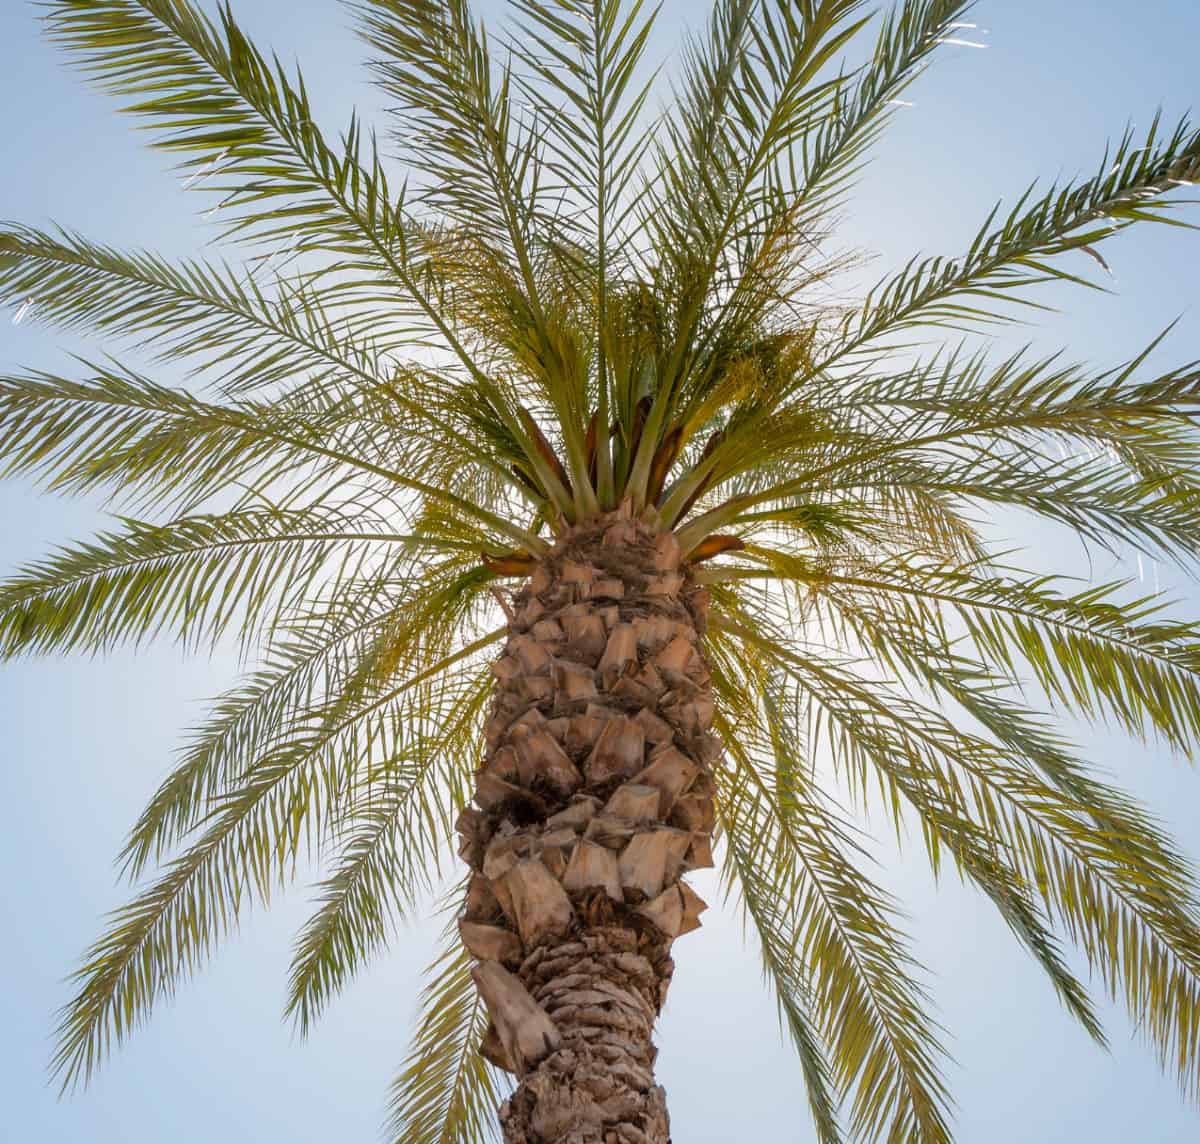 To get the fruit, plant both male and female date palms.